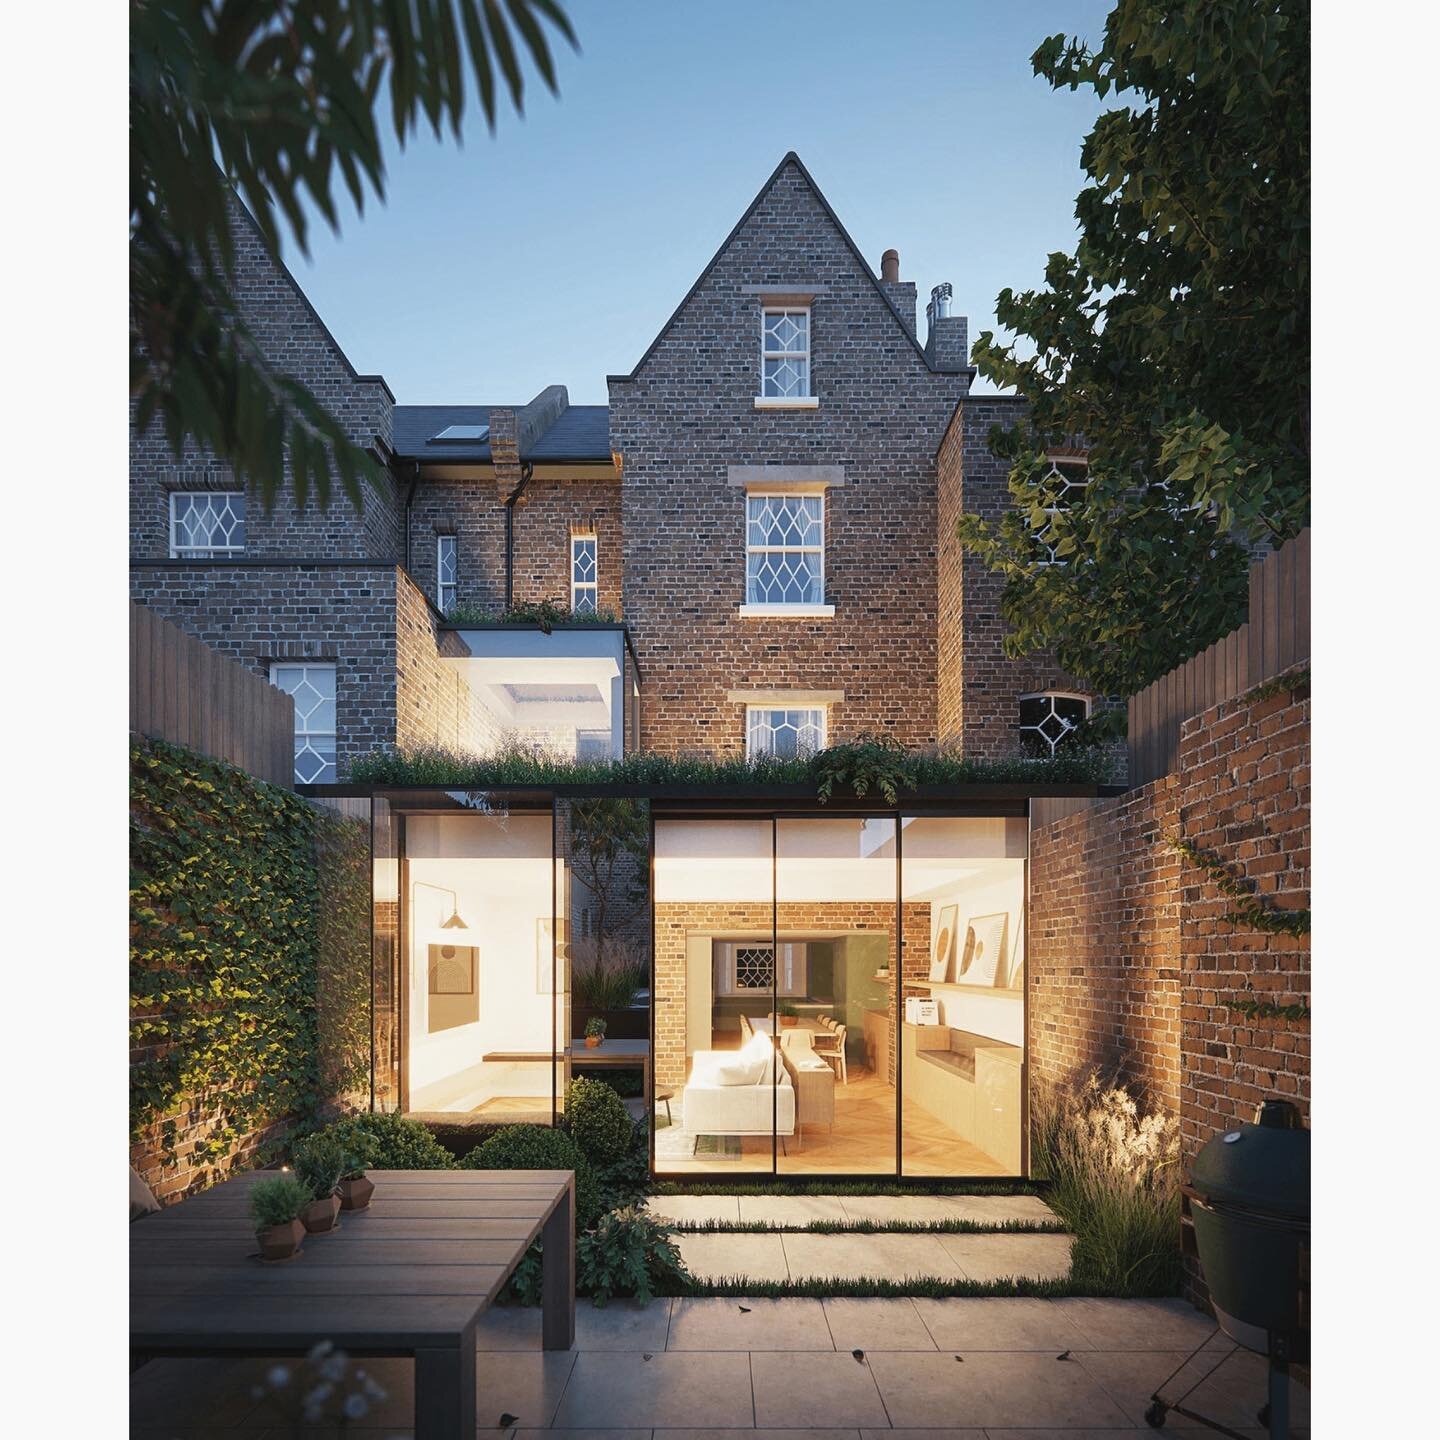 D U S K

The evening render of the double storey, mirrored extension for our Grade II Listed, De Beauvoir Square Project. 

Great progress already on site, this long held vision will soon be a reality.

Massive thanks to our collaborators @envelop.ar